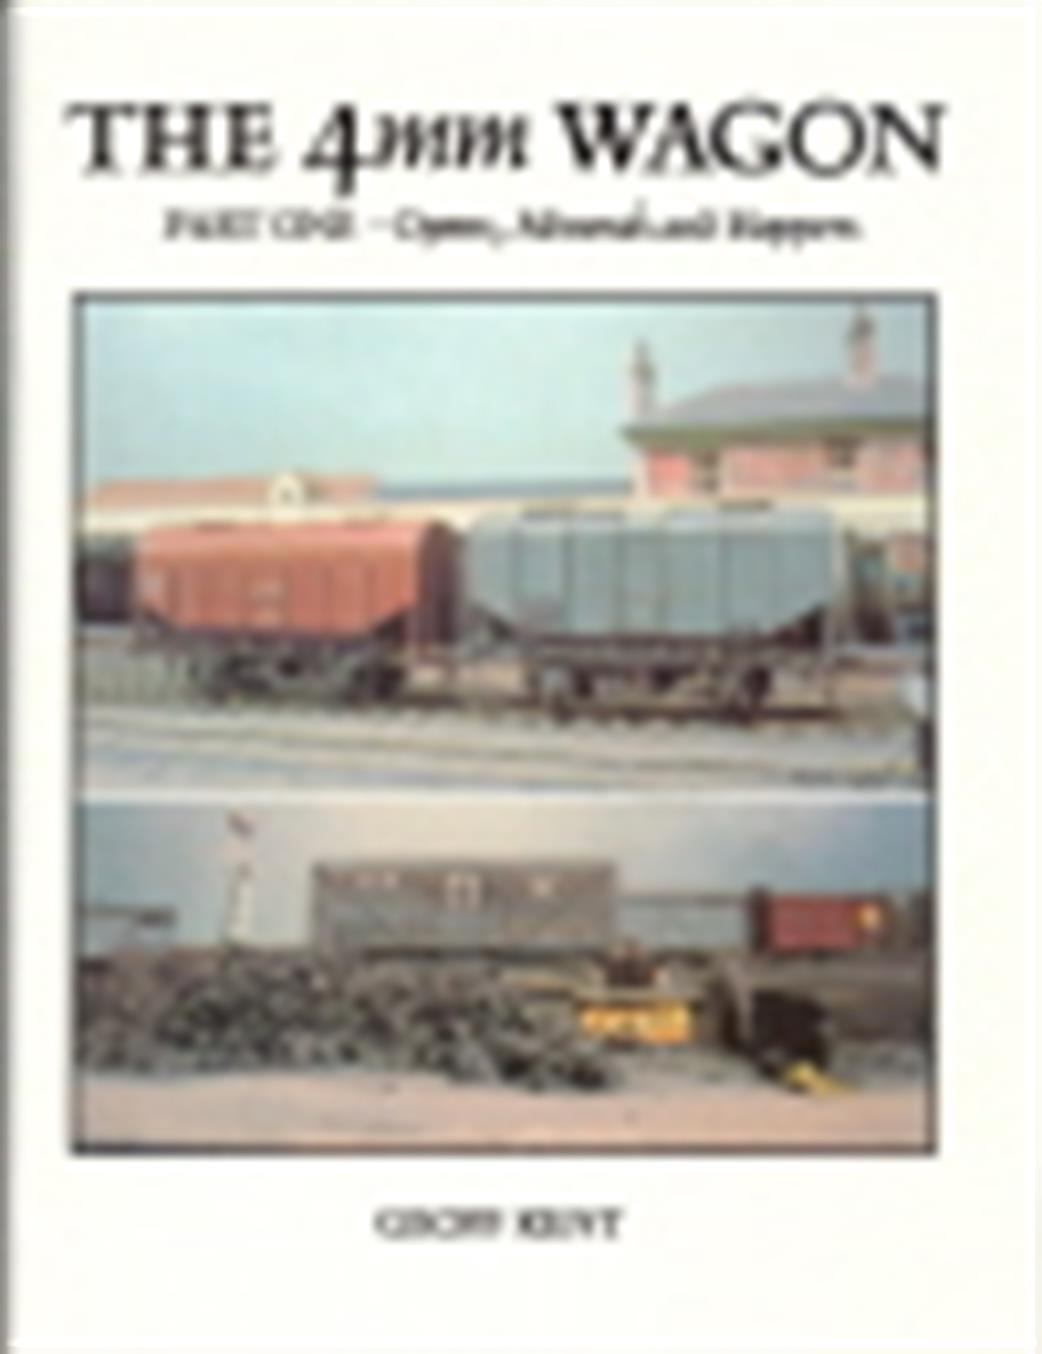 Wild Swan  1874103038 The 4mm Wagon Part One Open Wagons Geoff Kent